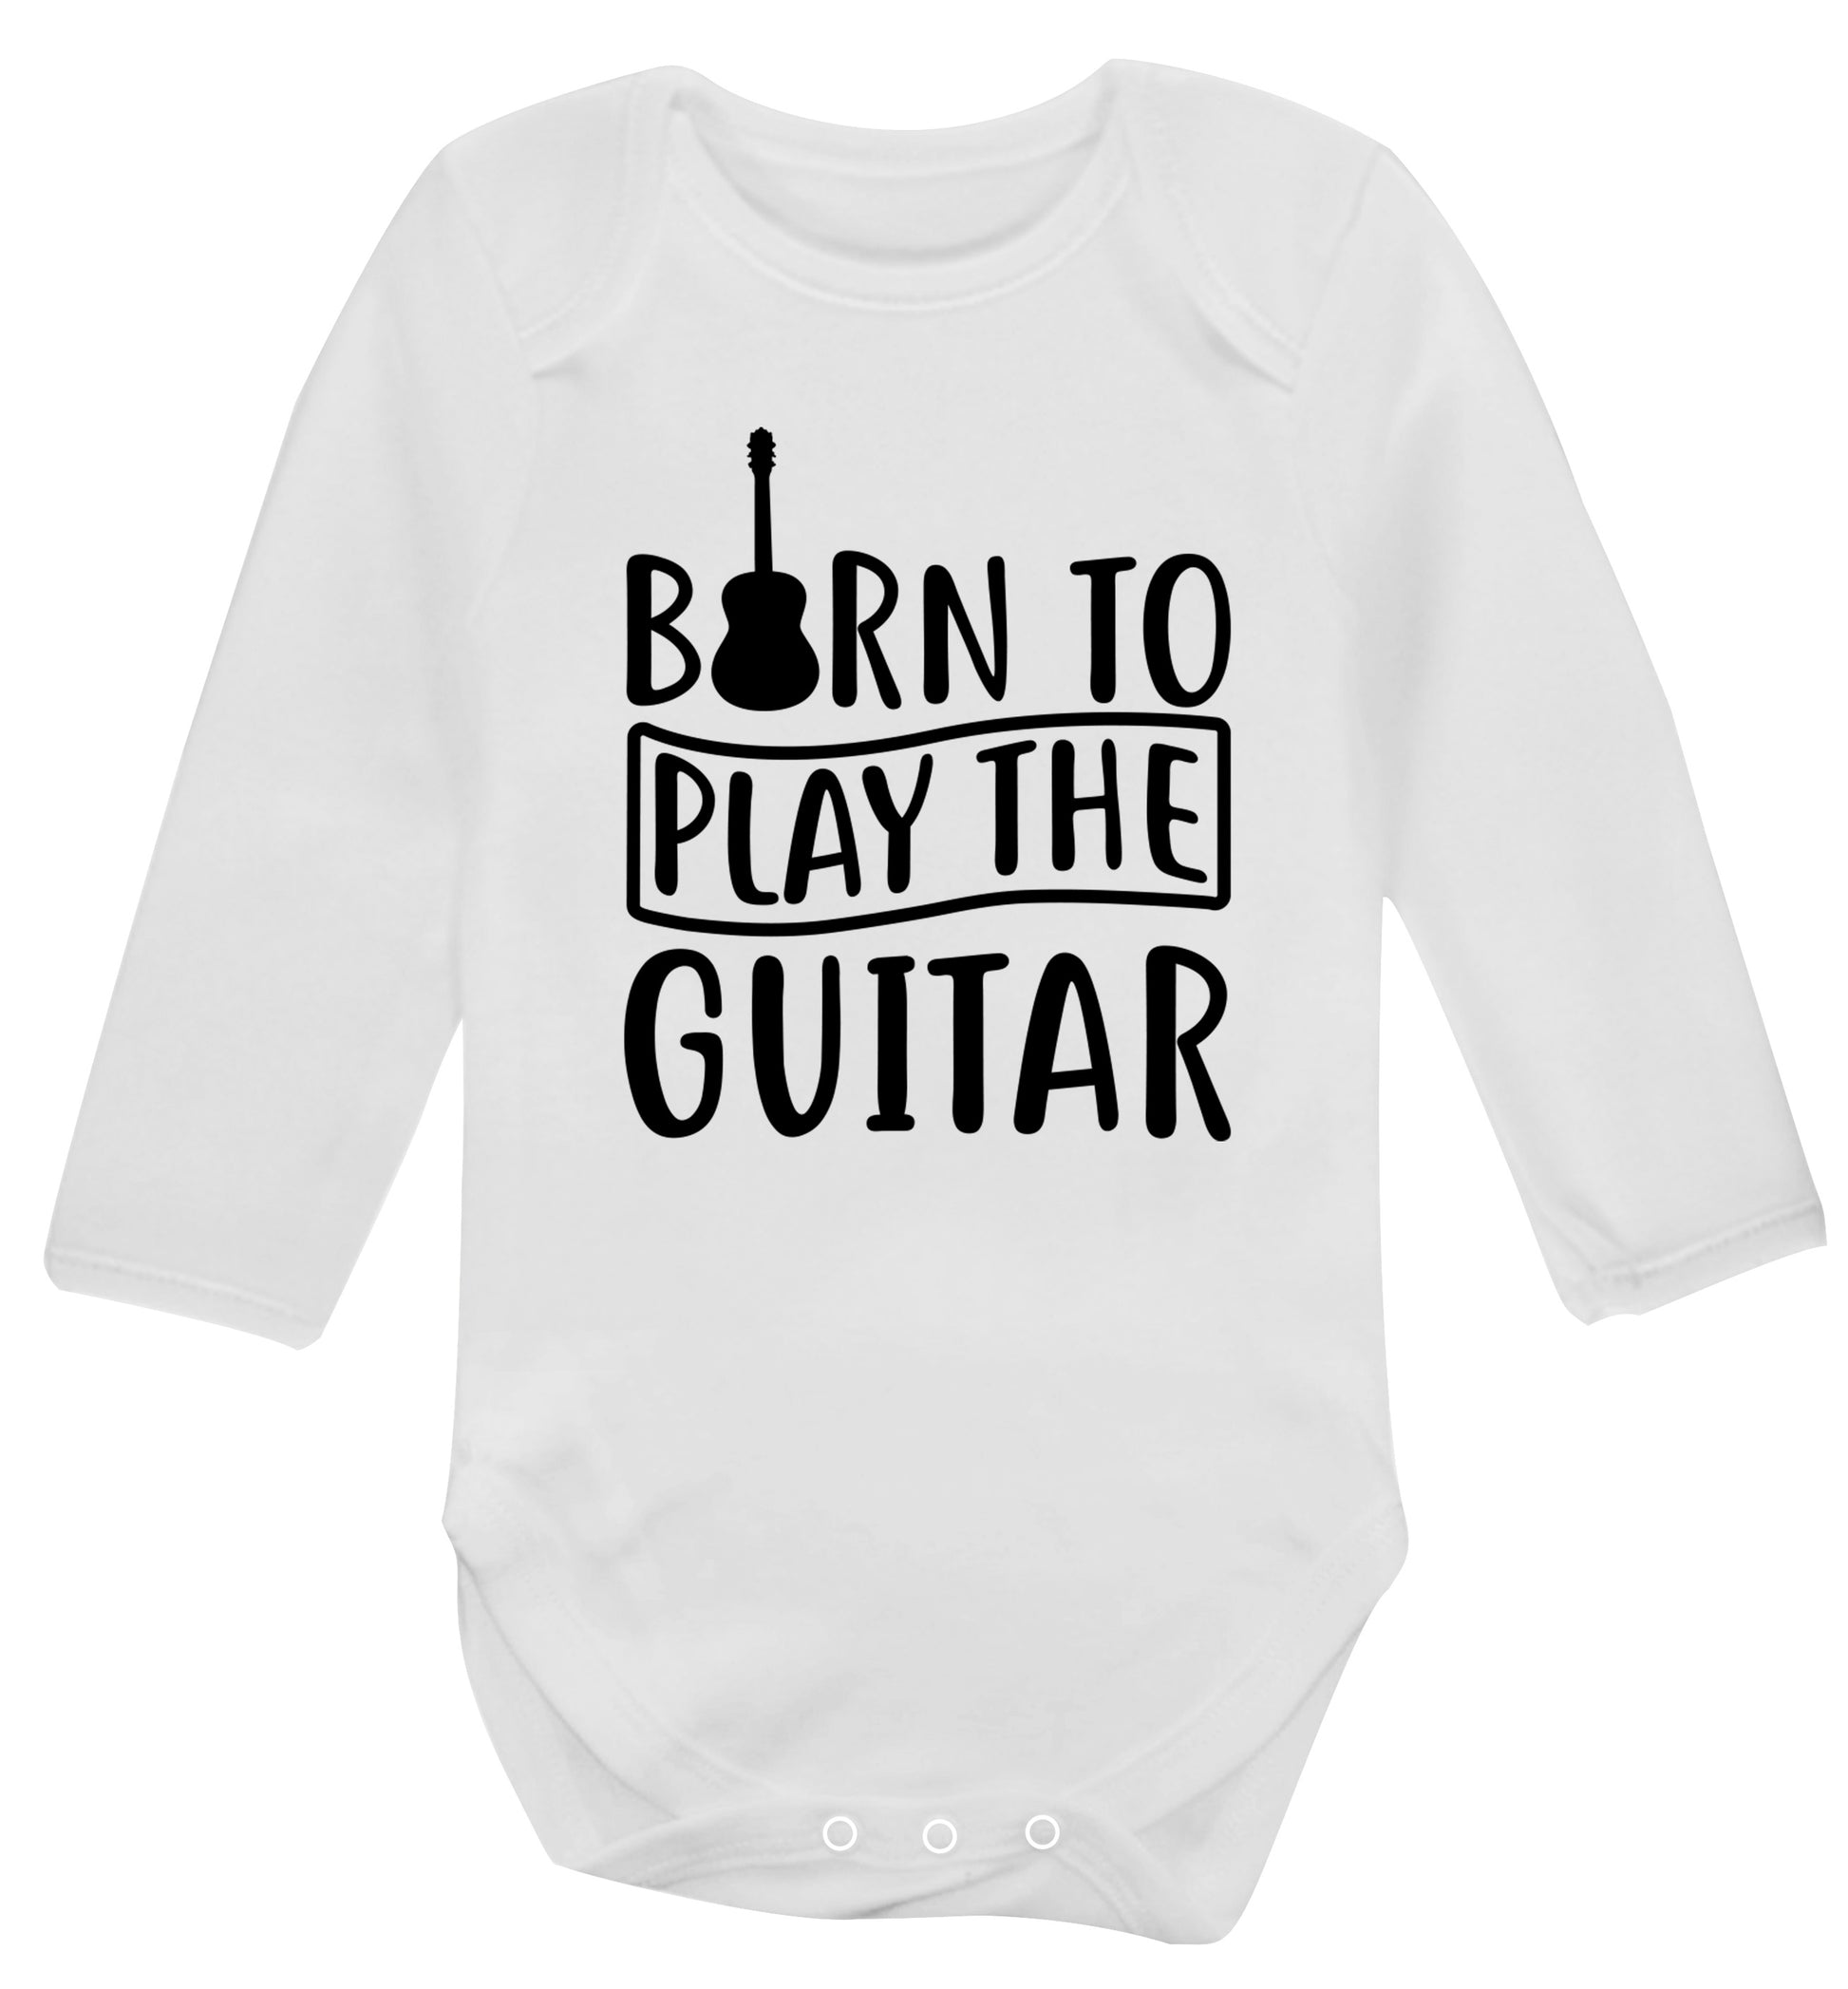 Born to play the guitar Baby Vest long sleeved white 6-12 months